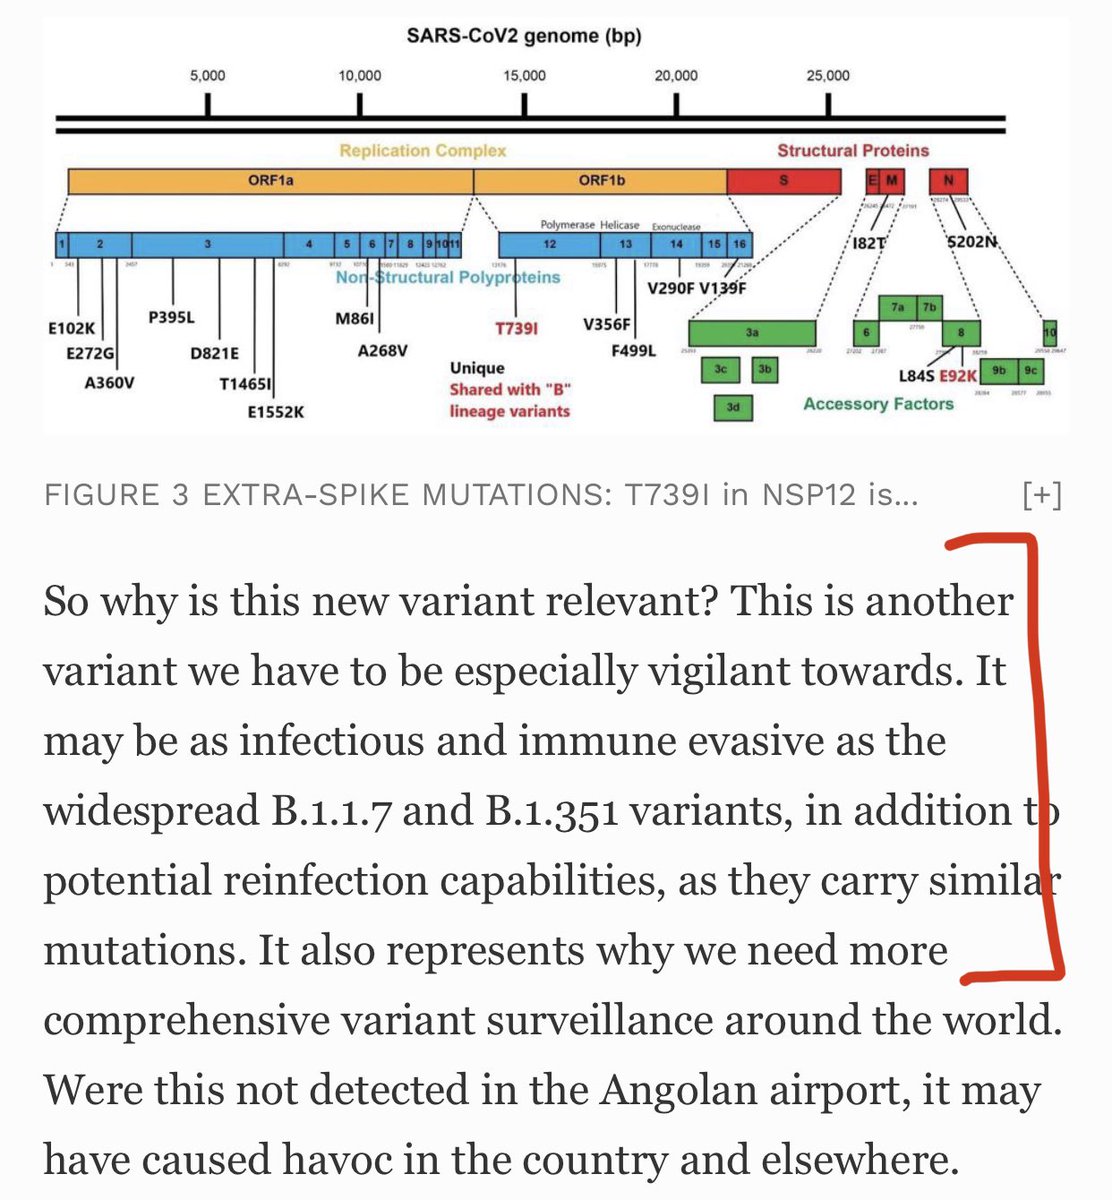 TANZANIA VARIANT—One of the most preeminent Harvard virology professors is trying to warn—Tanzanian variant branched off Wuhan 1.0 strain but acquired all the bad mutations of  #B117 &  #B1351 independently—convergent evolution. By  @WmHaseltine.  #COVID19  https://www.forbes.com/sites/williamhaseltine/2021/04/15/new-tanzanian-variant-detected-in-angola-from-an-entirely-new-branch-of-sars-cov-2/